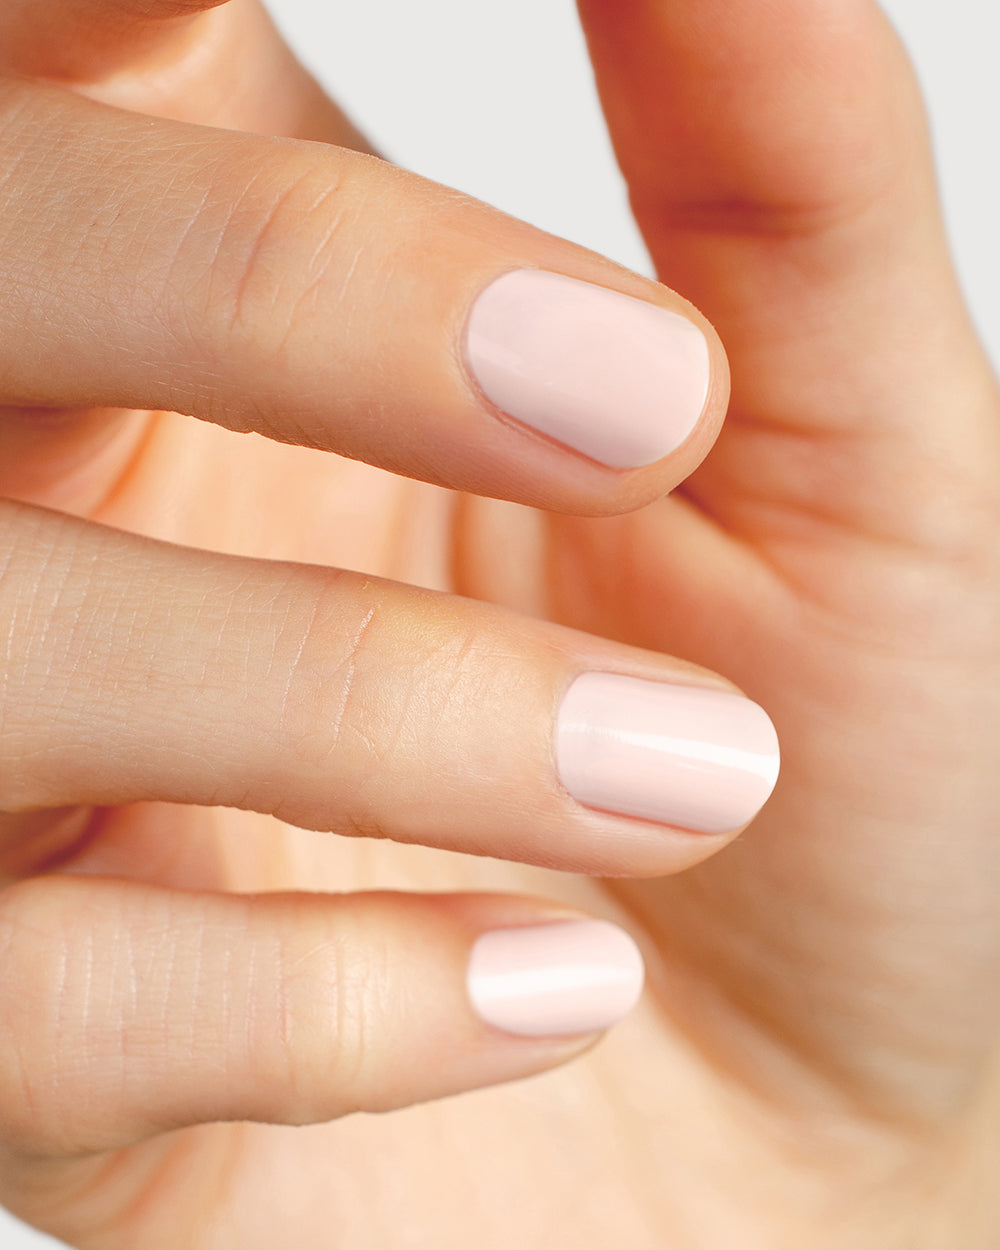 Lip Oil Nails Are The Juicy Manicure You'll Want To Rock This Spring